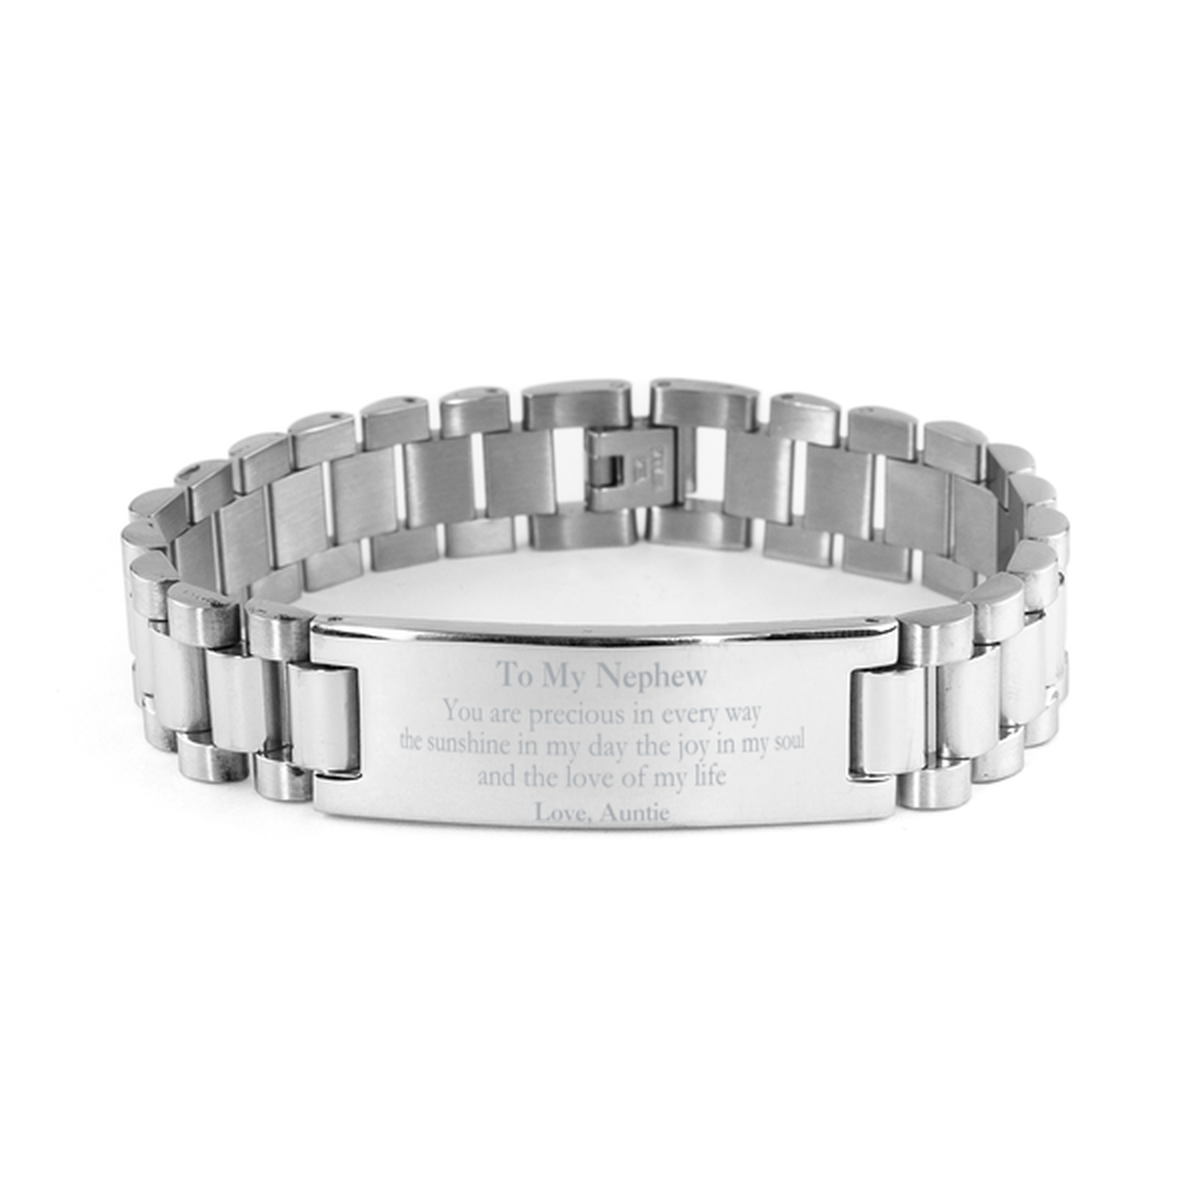 Graduation Gifts for Nephew Ladder Stainless Steel Bracelet Present from Auntie, Christmas Nephew Birthday Gifts Nephew You are precious in every way the sunshine in my day. Love, Auntie